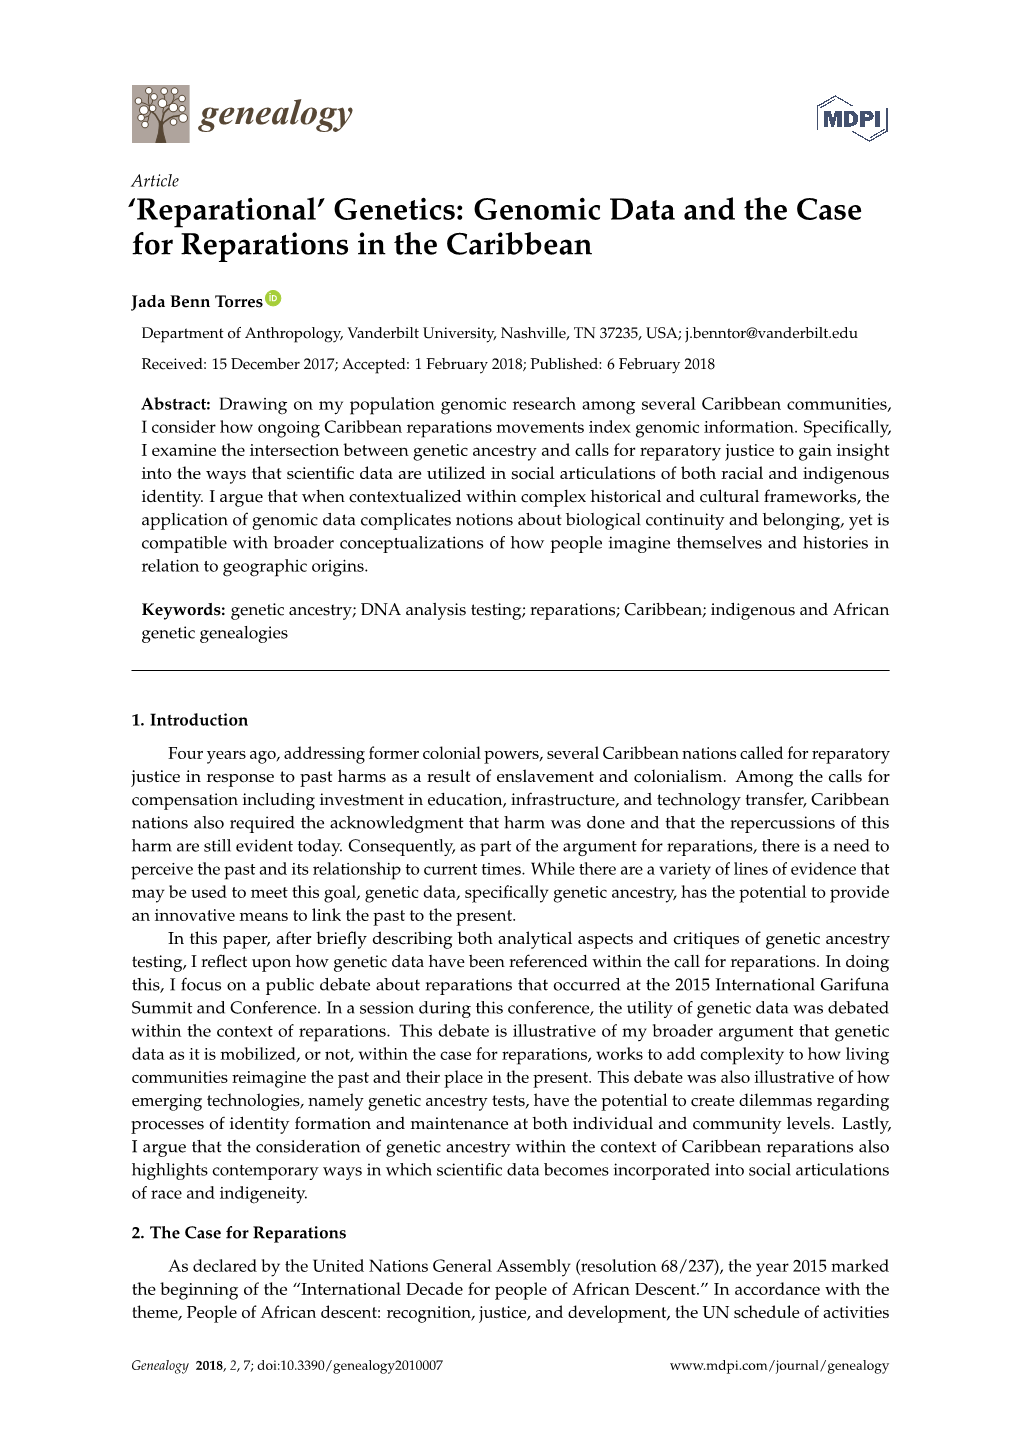 Genetics: Genomic Data and the Case for Reparations in the Caribbean